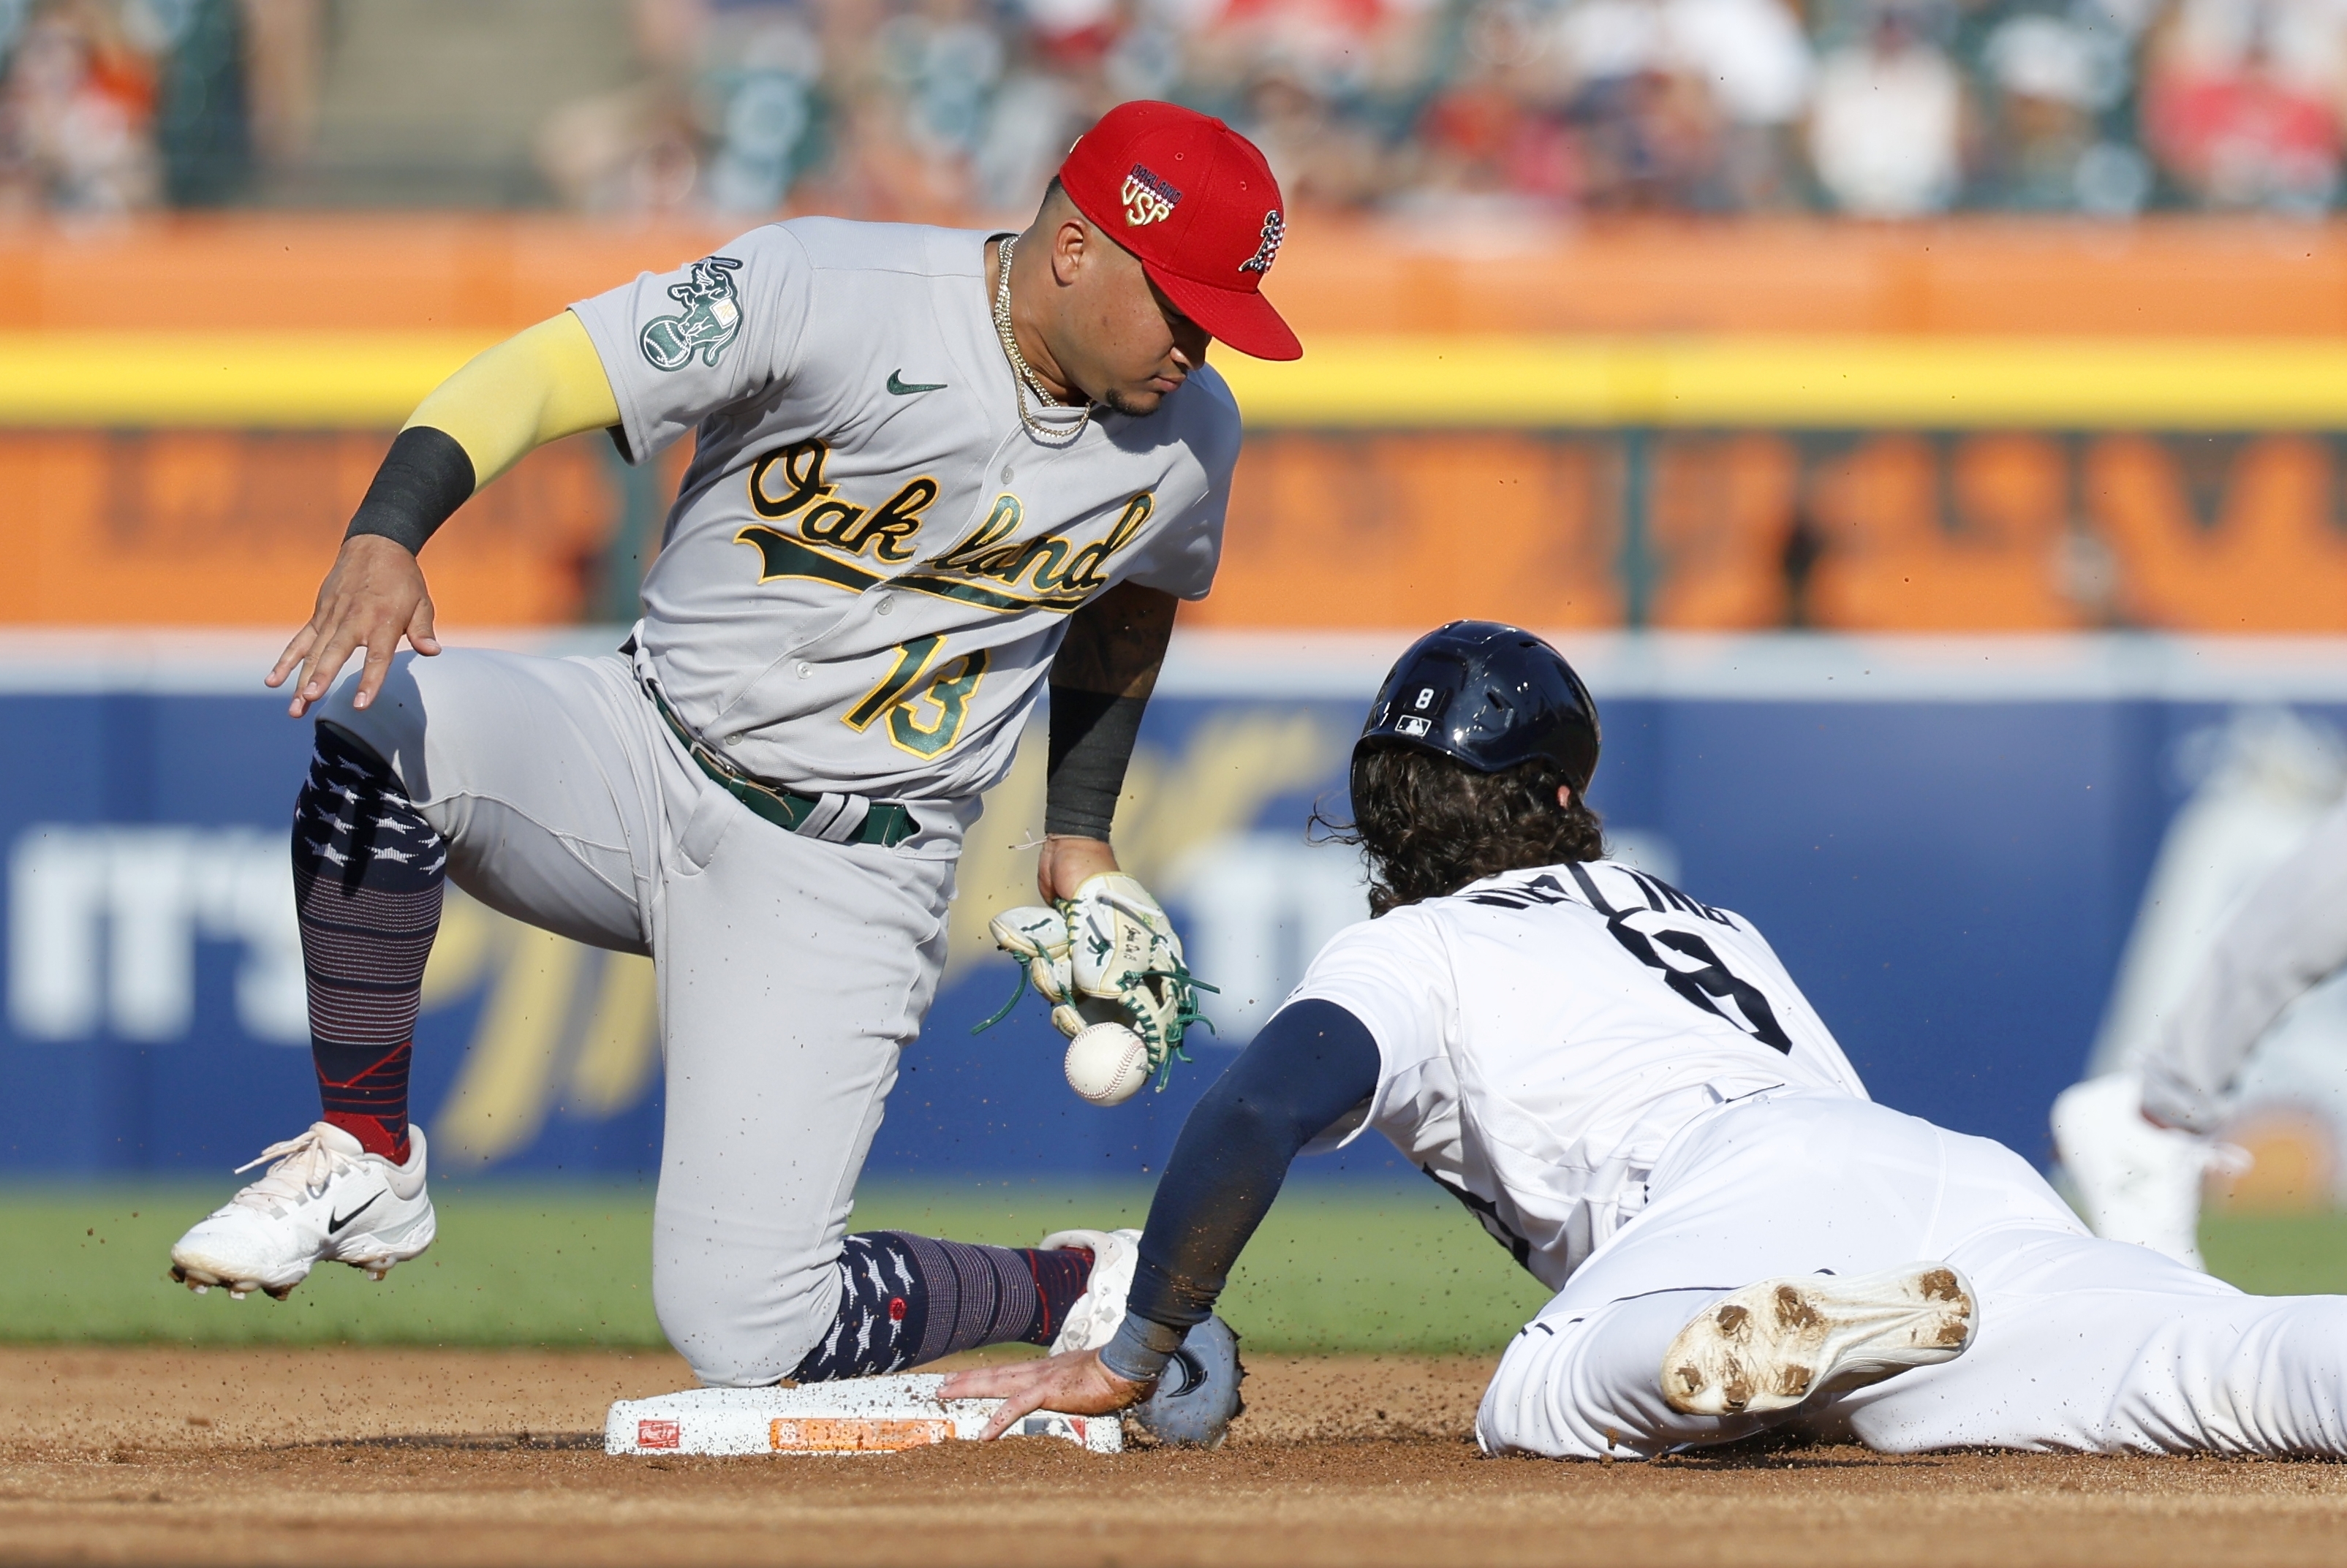 How to Watch the Oakland Athletics vs